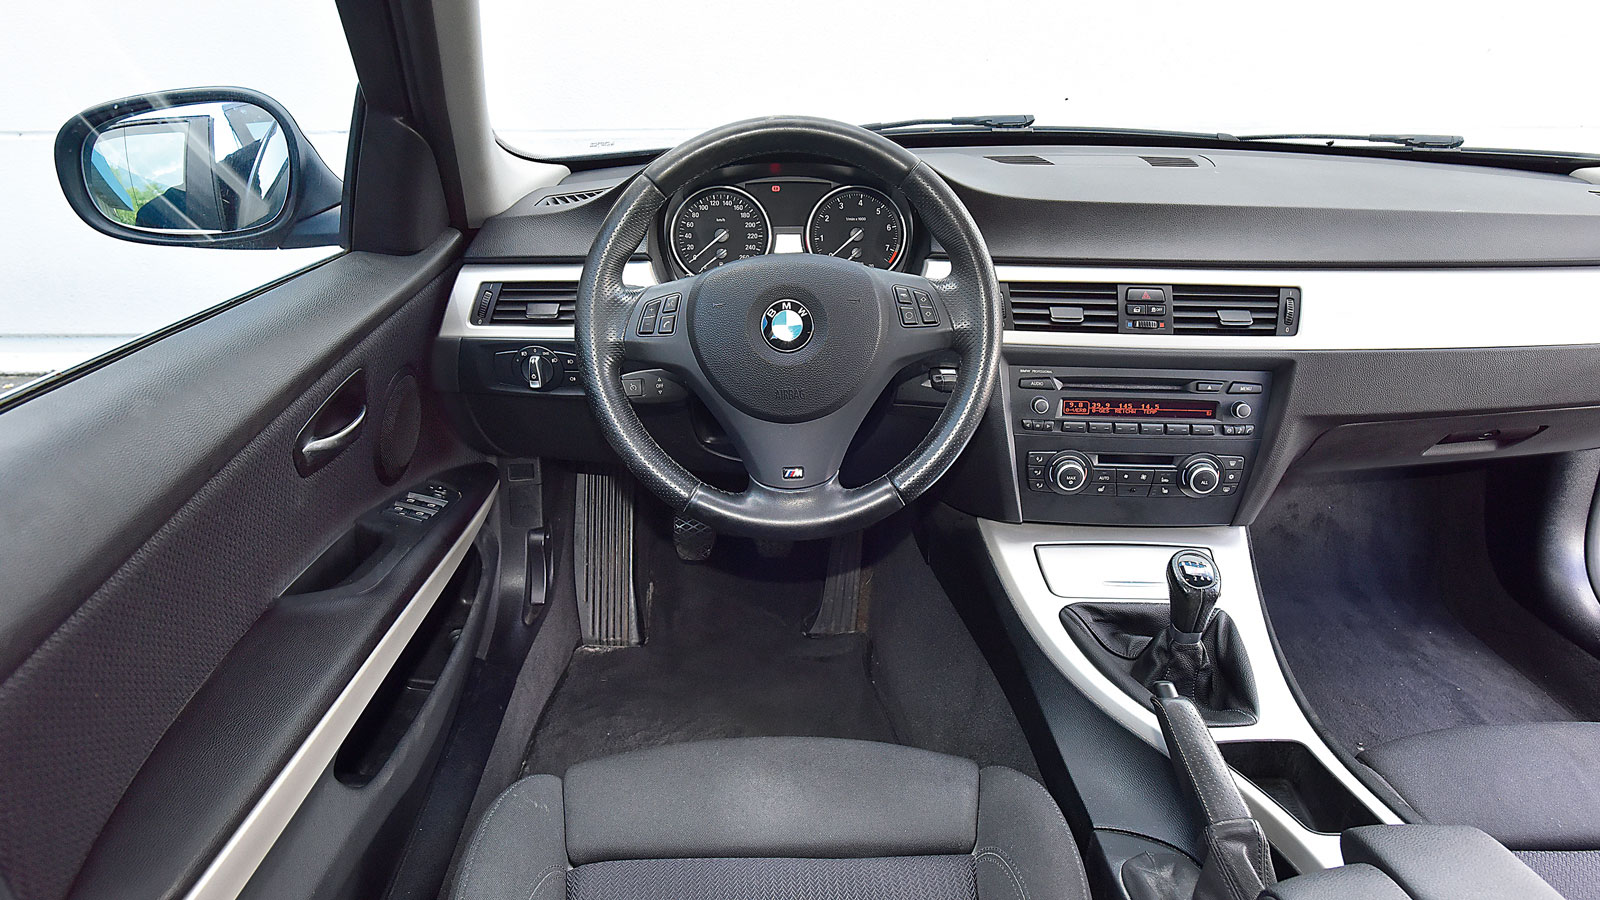 Test μεταχειρισμένου: BMW 325i Touring E91